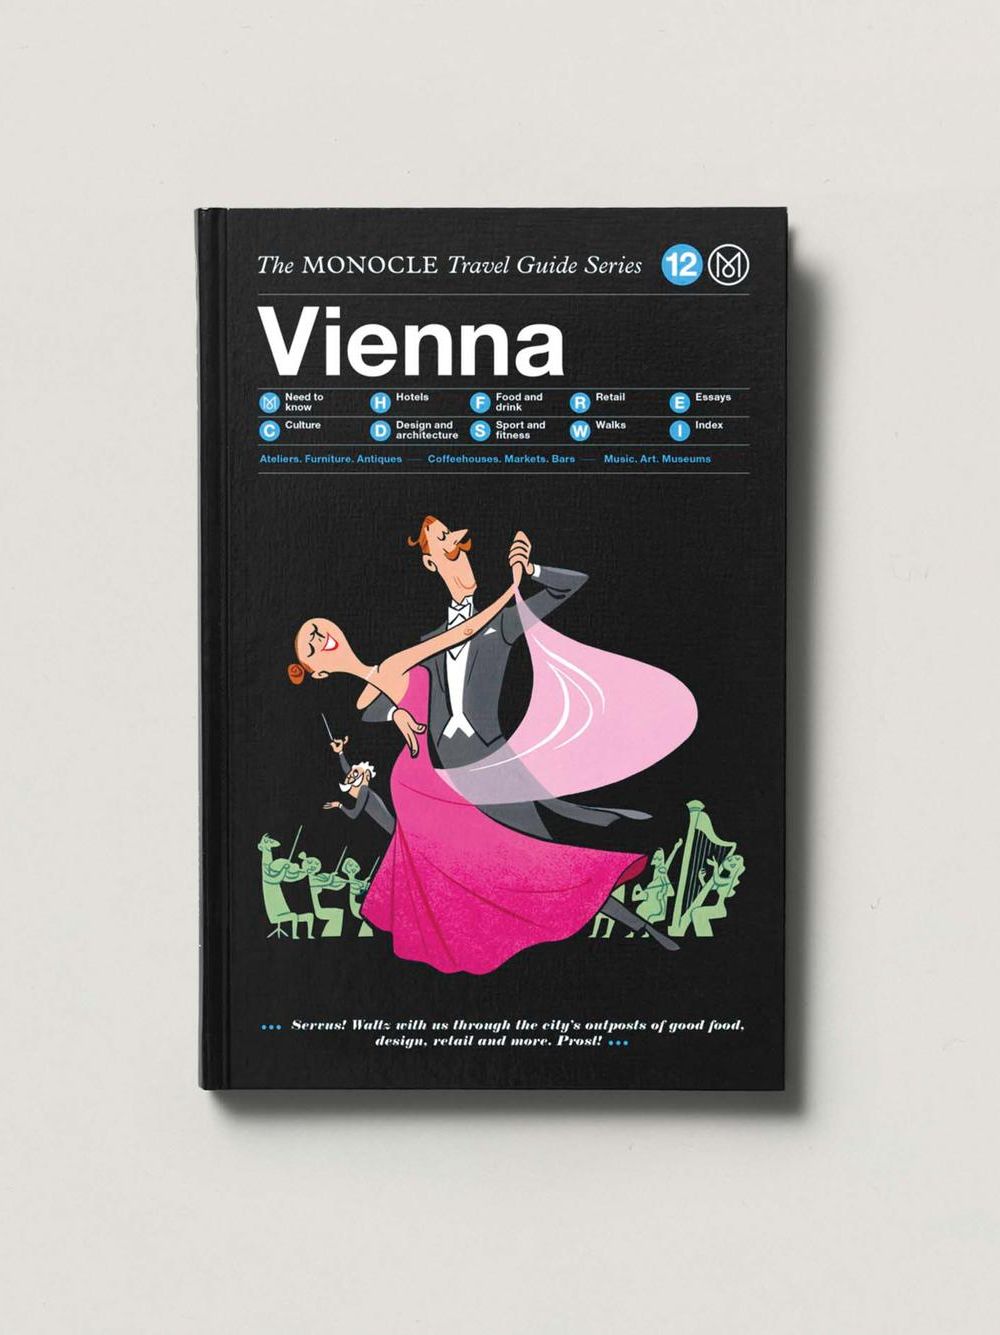 The Monocle Travel Guide, Vienna